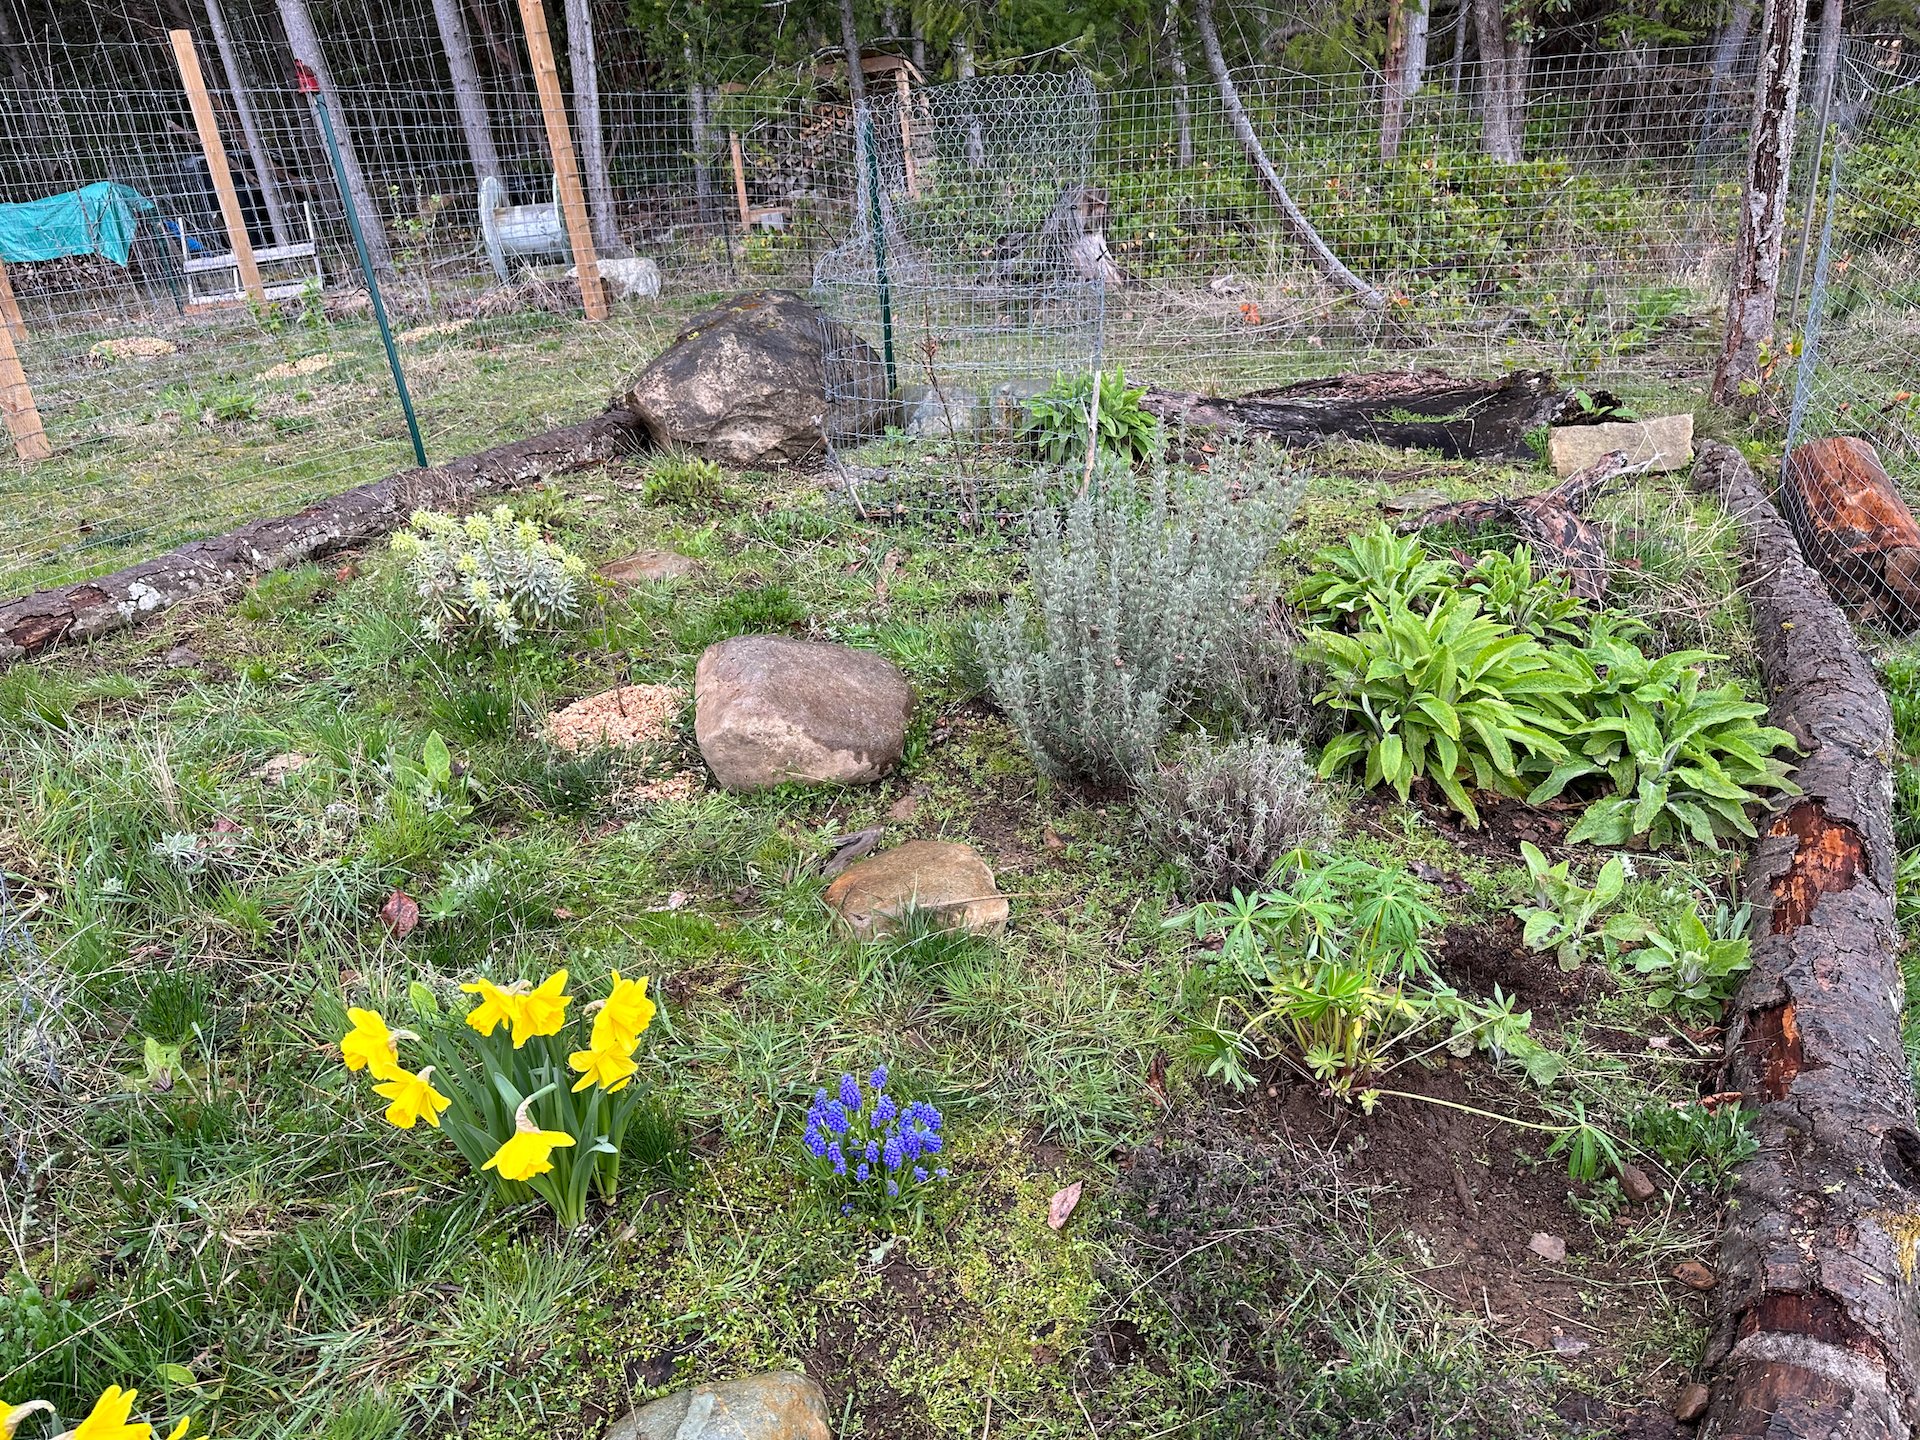  The new garden (the “Deer Garden” that Justine created last year is really looking great.  